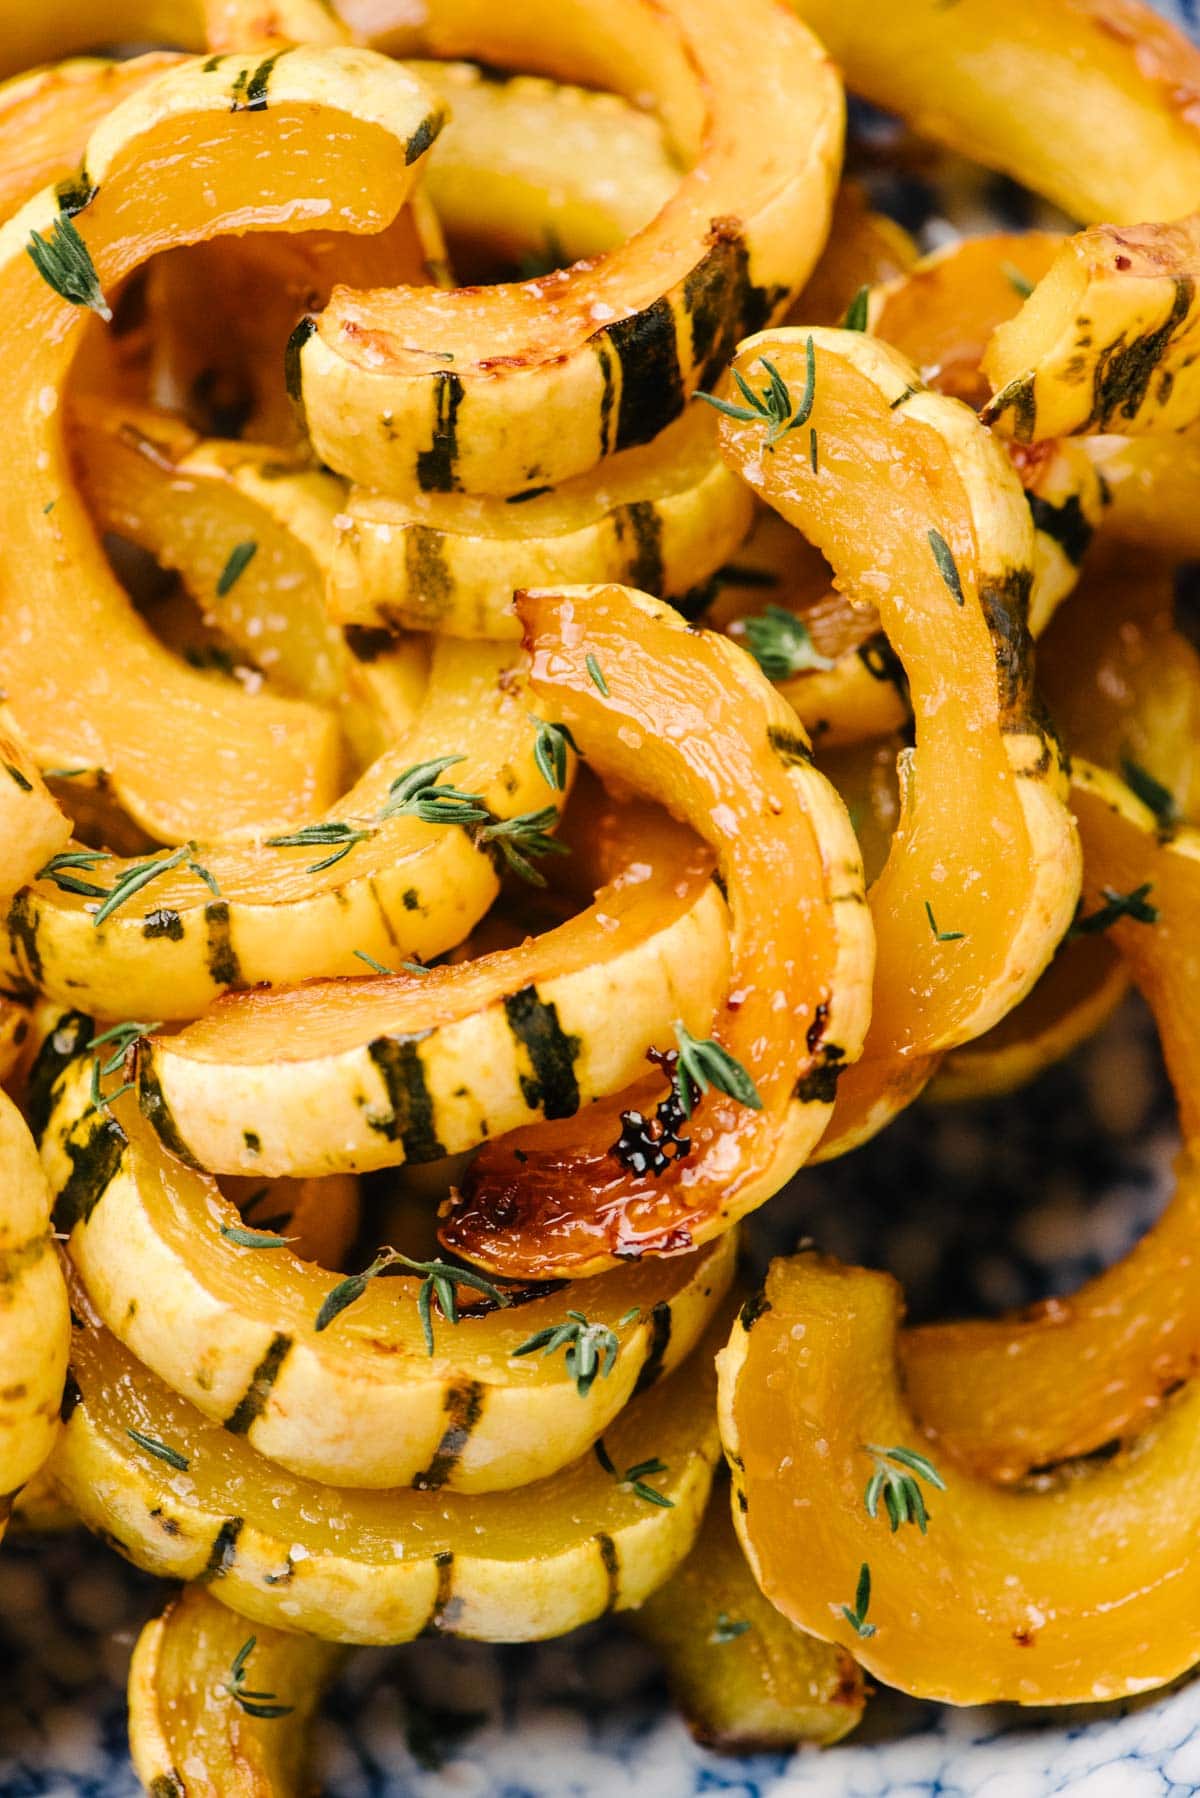 Side view, detail of roasted delicata squash slices in a blue speckled bowl, garnished with fresh thyme.